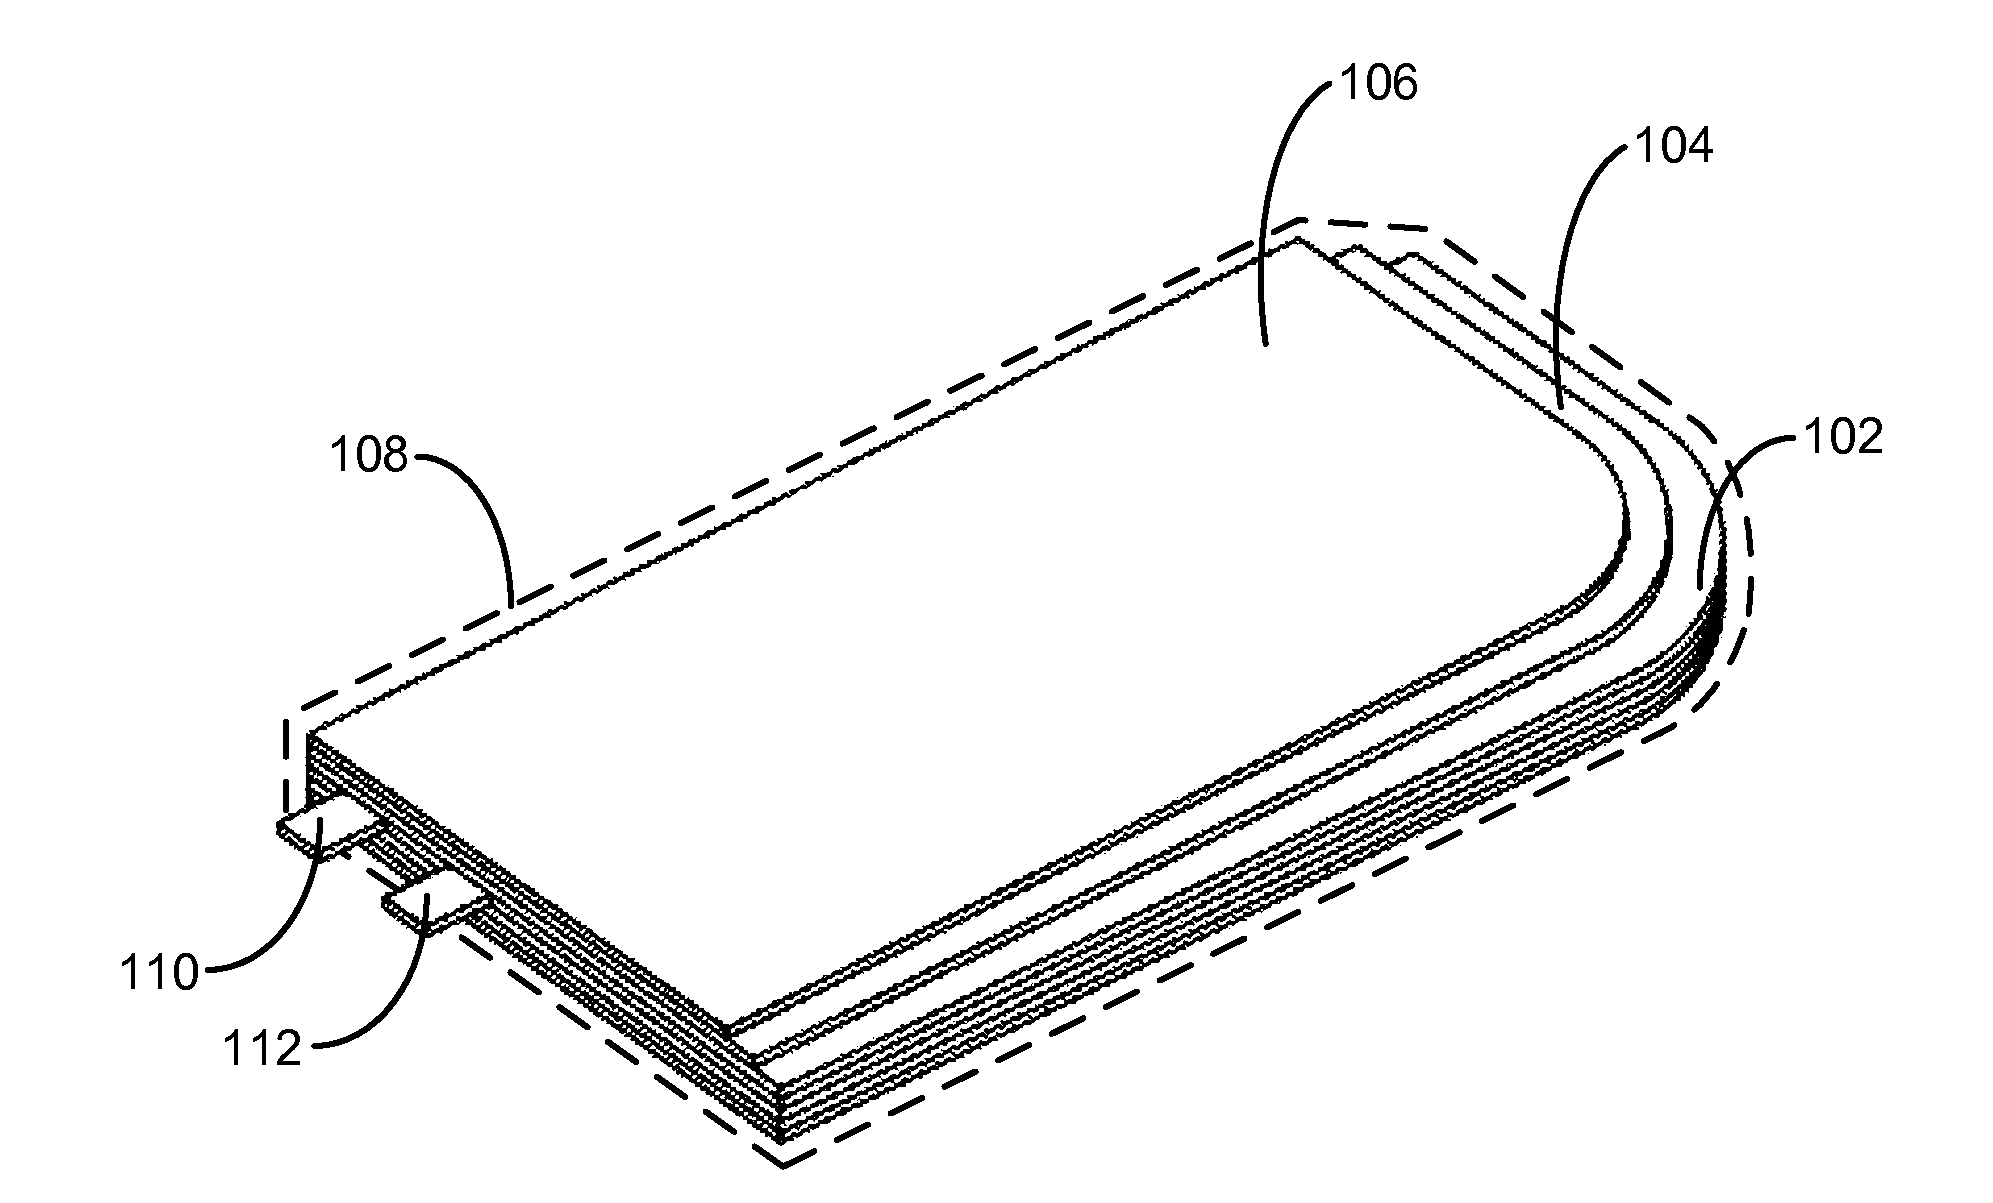 Non-rectangular batteries for portable electronic devices